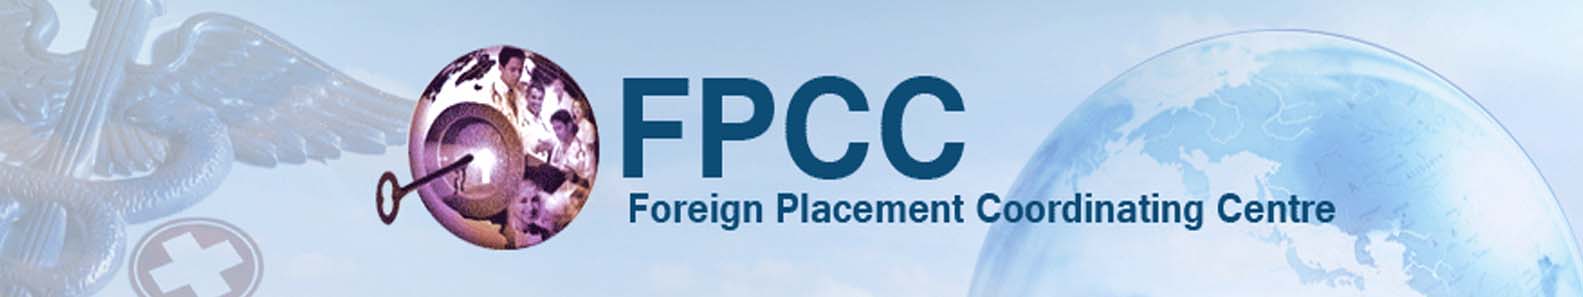 Foreign Placement Coordinating Centre